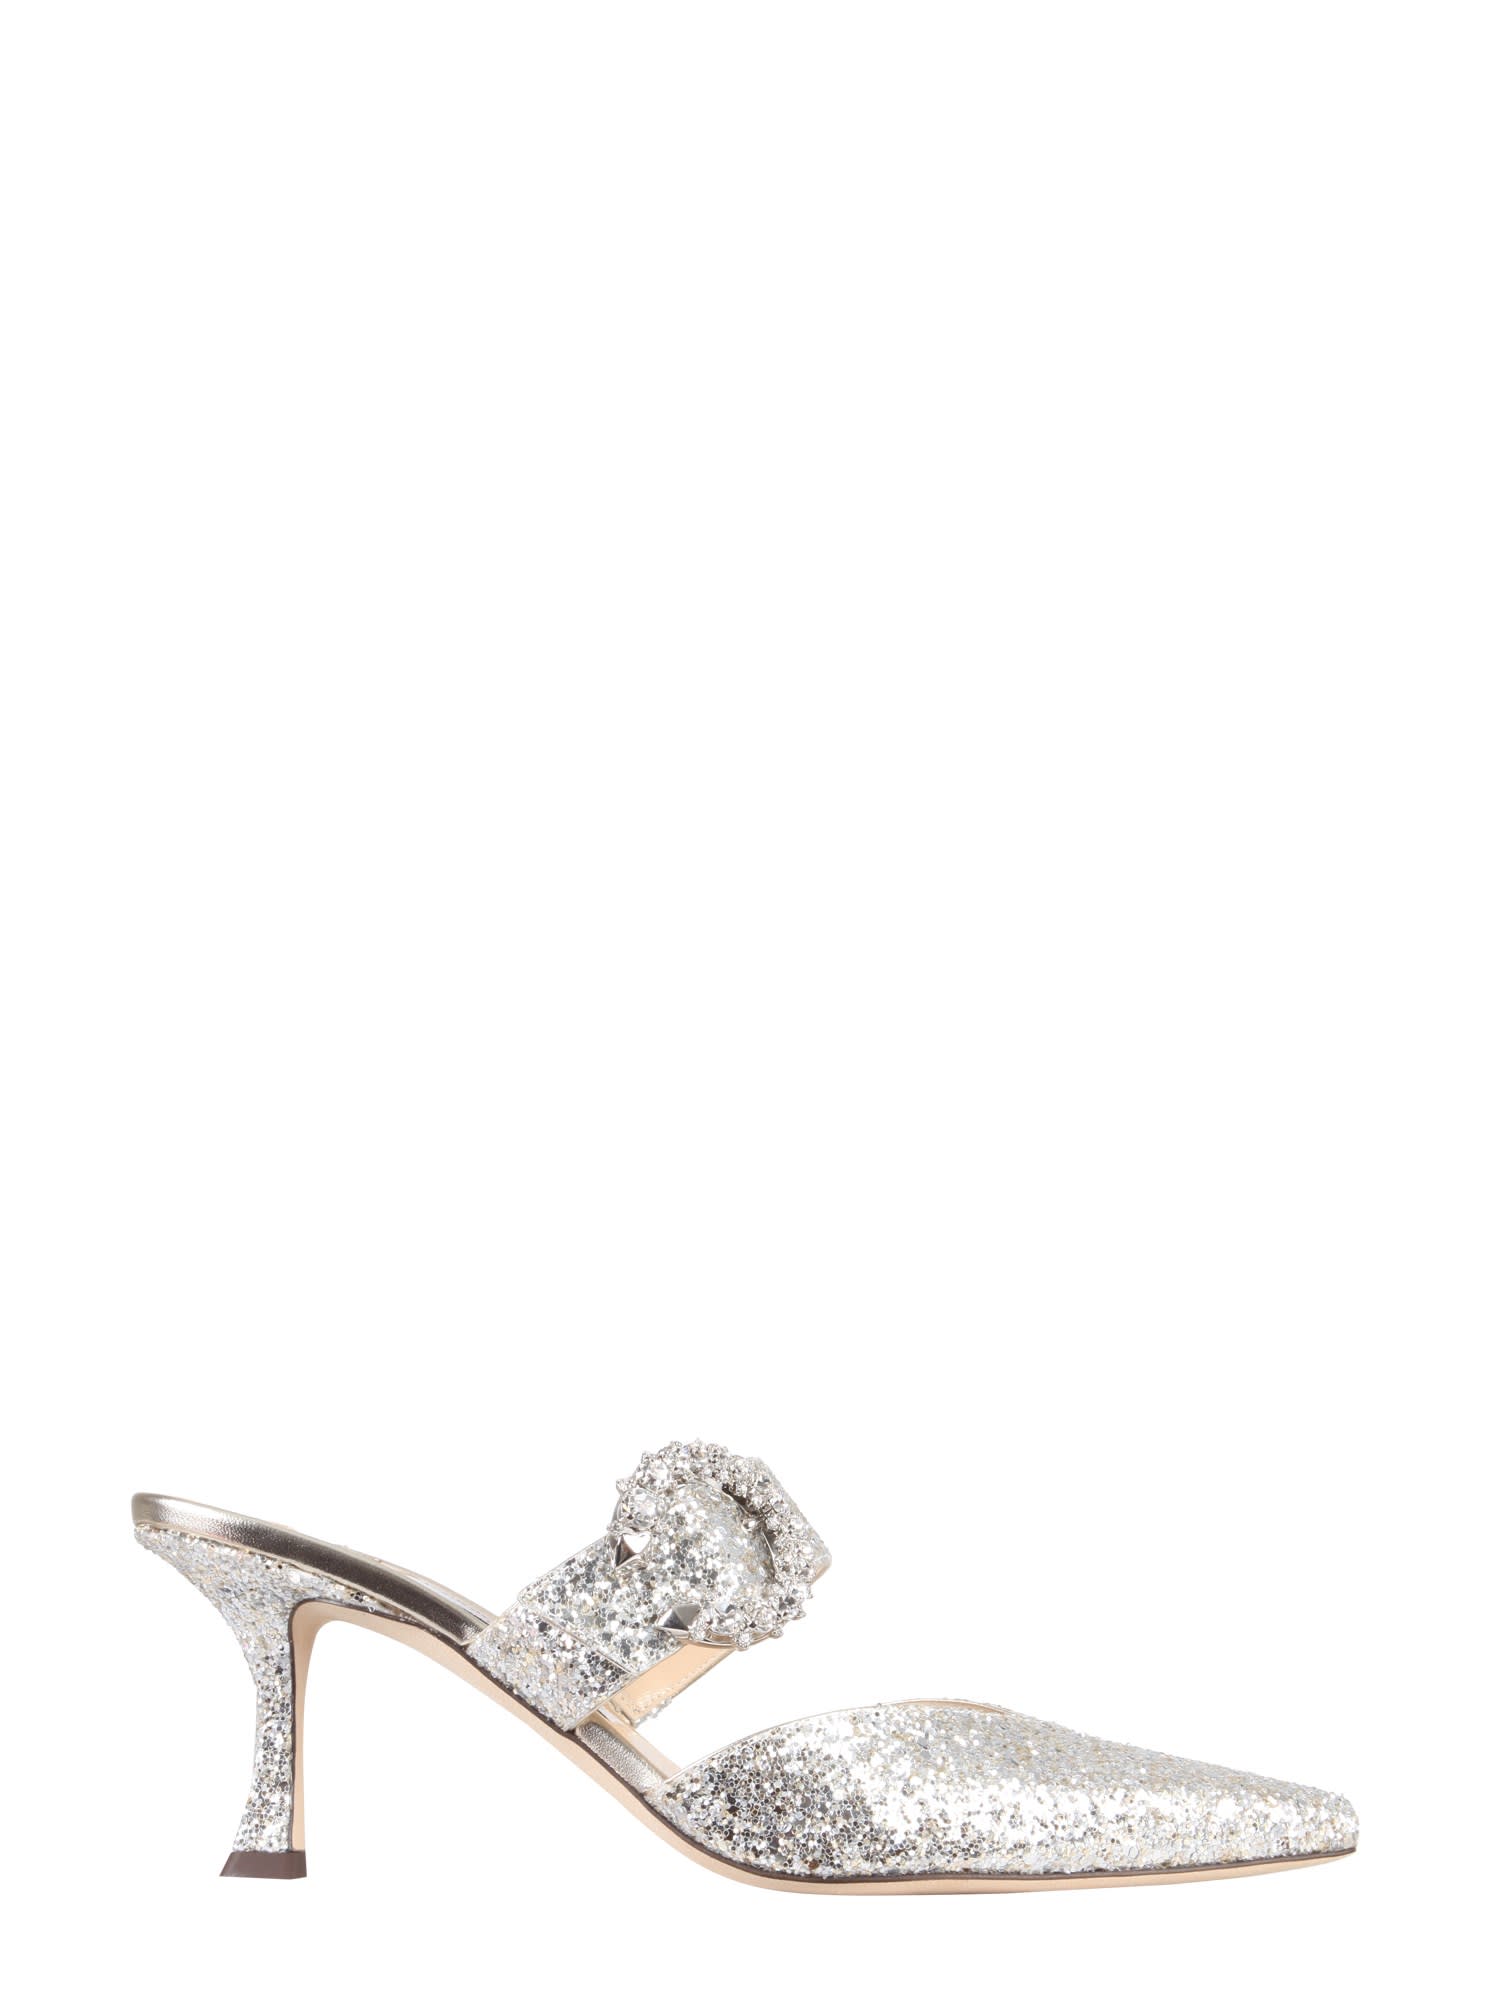 Buy Jimmy Choo Mule Marta Sandals online, shop Jimmy Choo shoes with free shipping